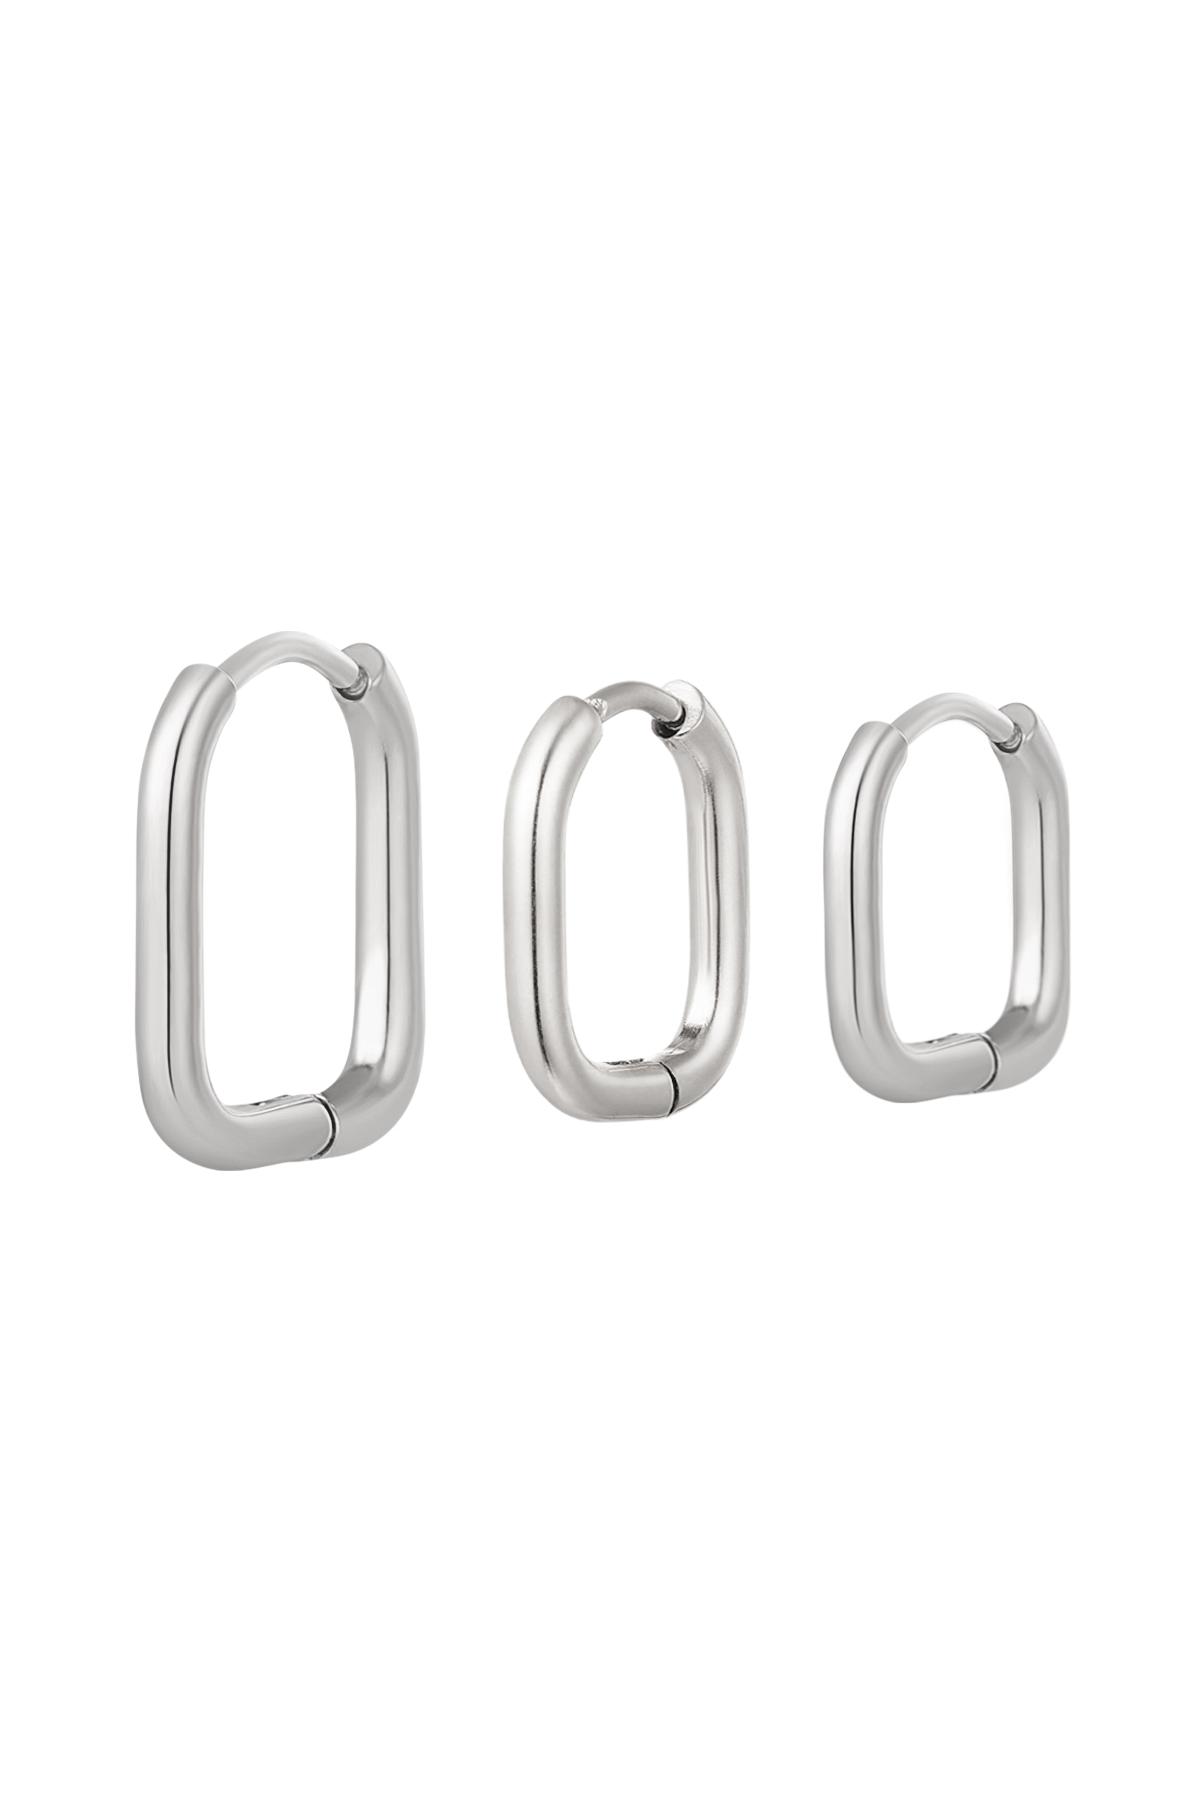 Set of earrings 3 different sizes Silver Stainless Steel 